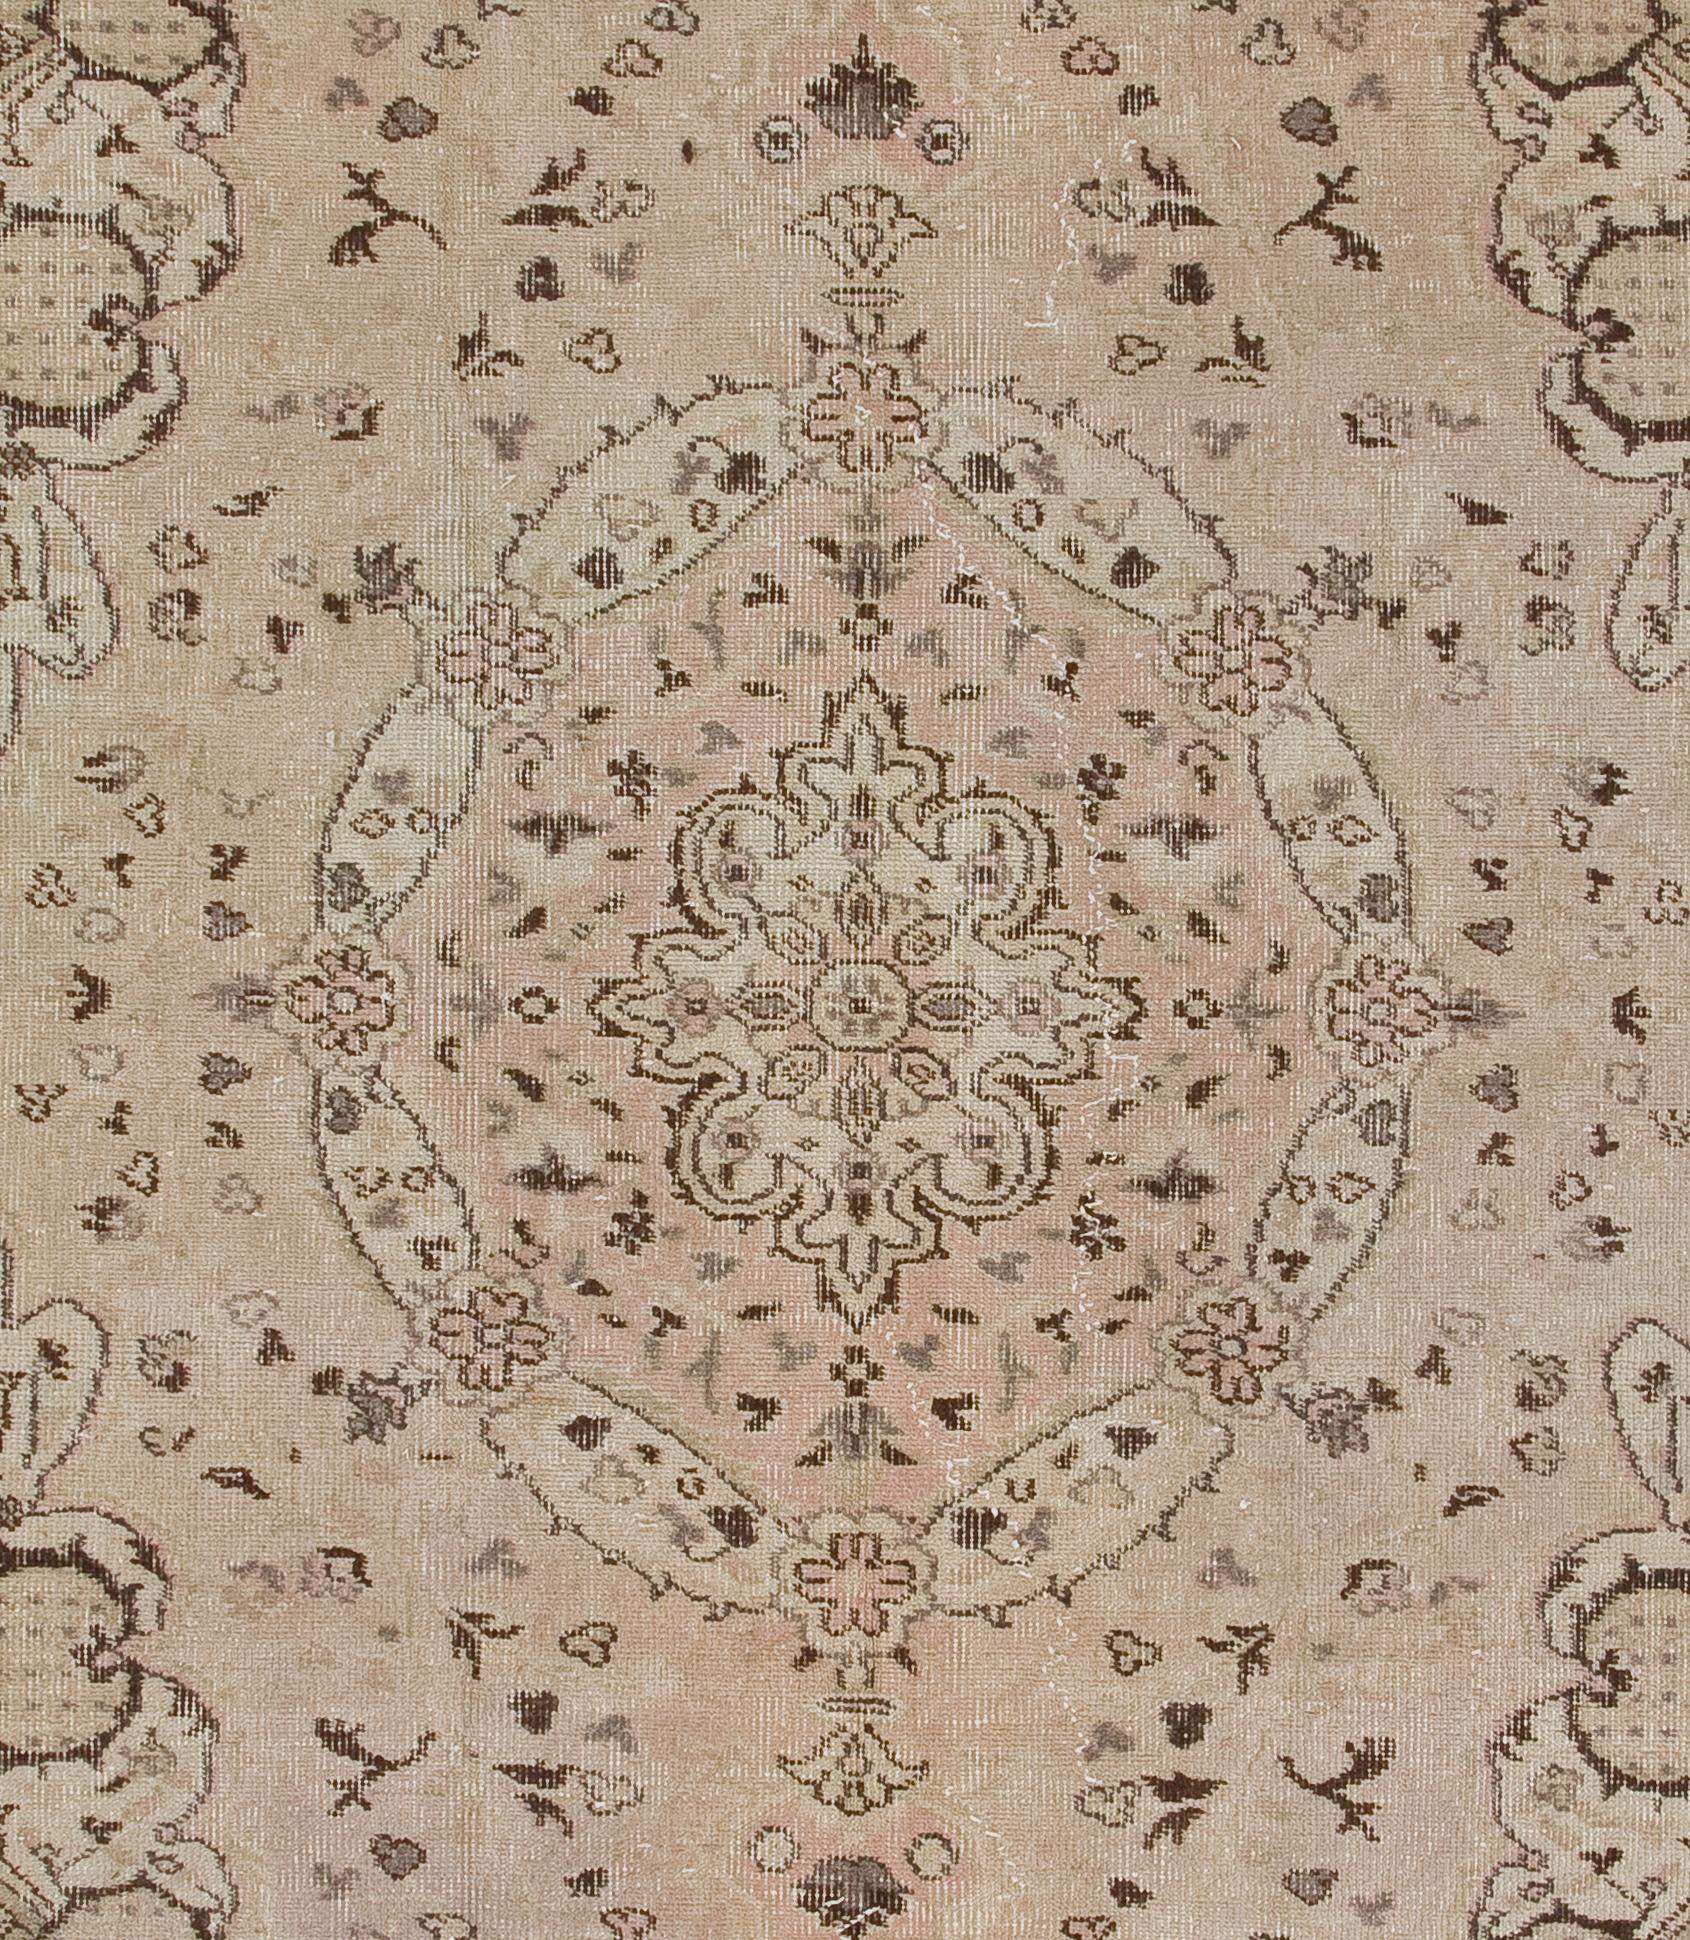 Hand-Woven 5.7x8.6 Ft Vintage Handmade Turkish Wool Area Rug in Neutral Tones For Sale